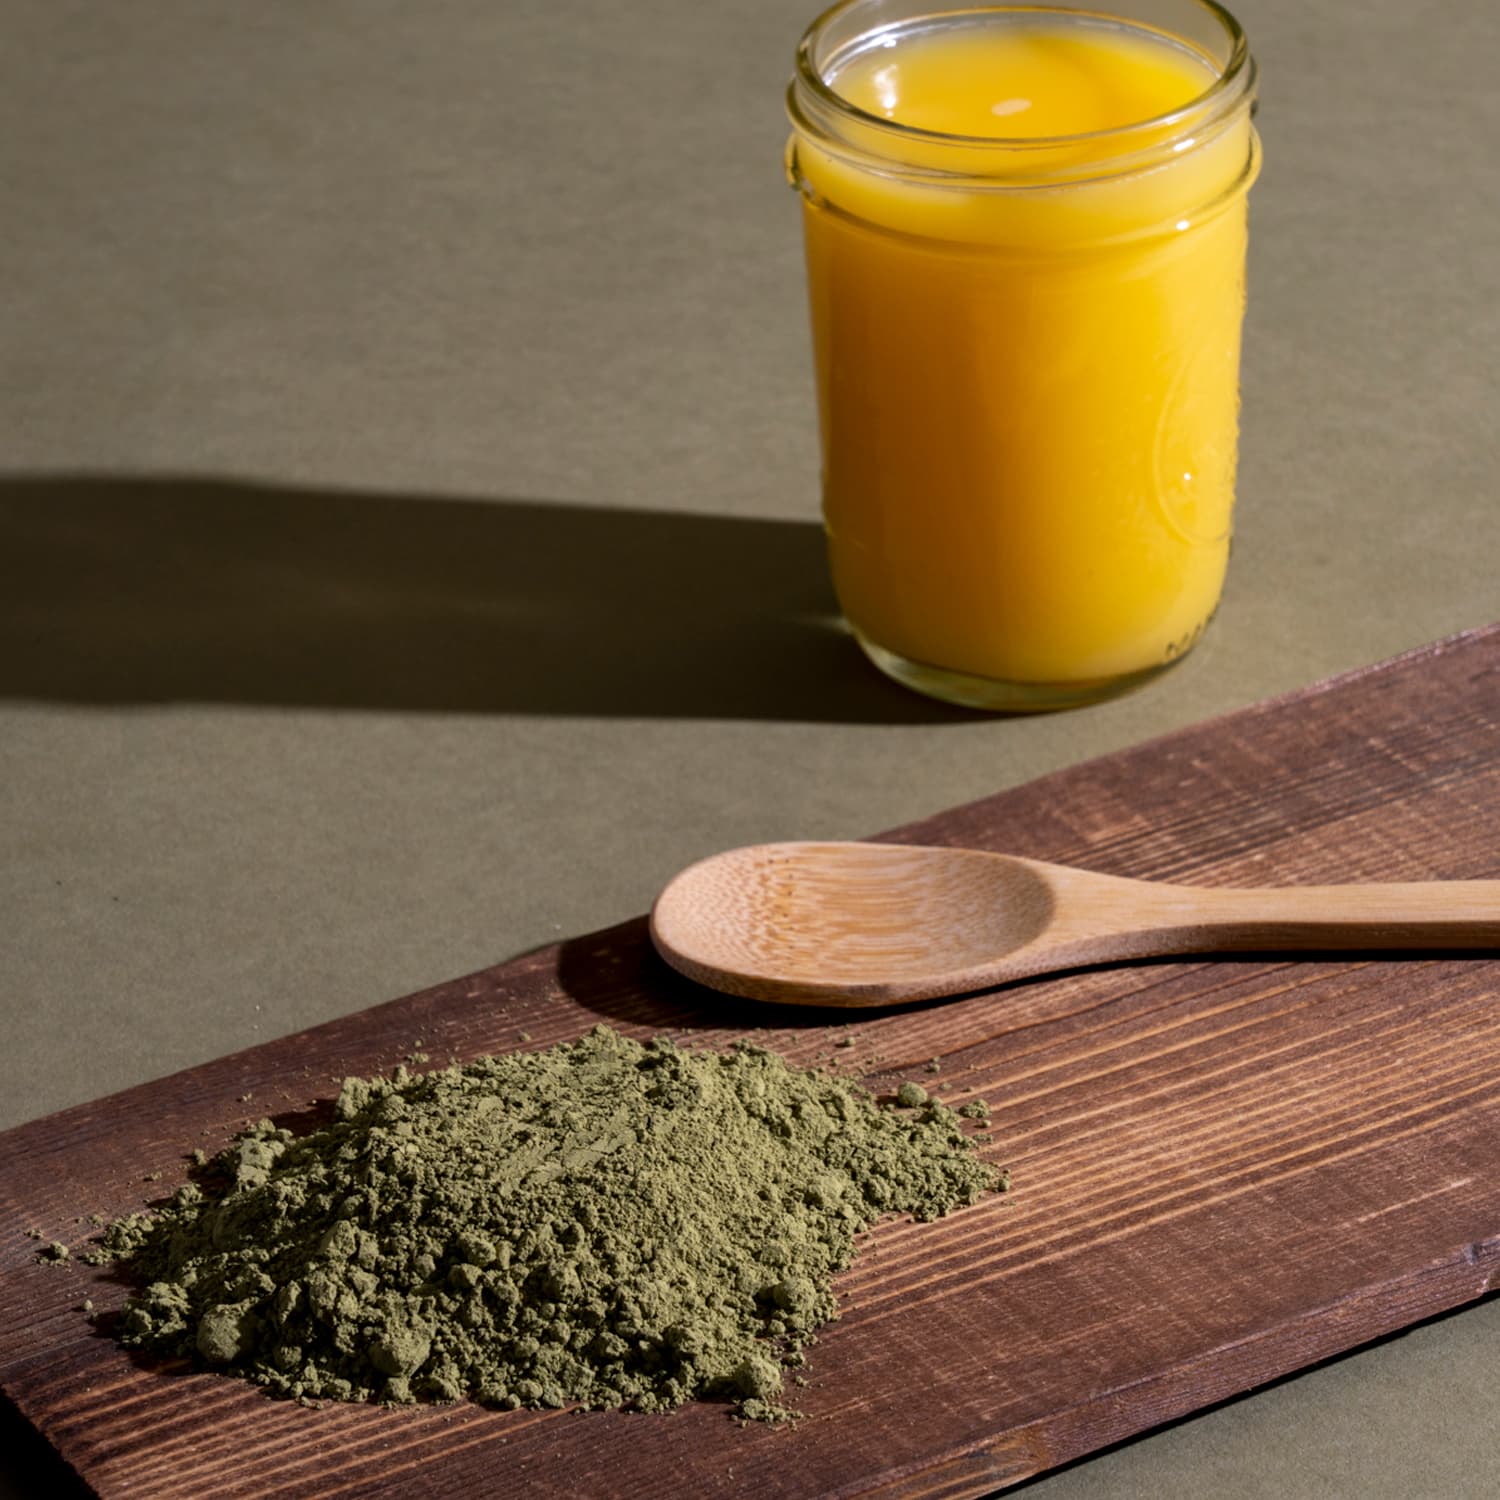 A wooden cutting board with a spoon and brown powder next to a glass of orange juice